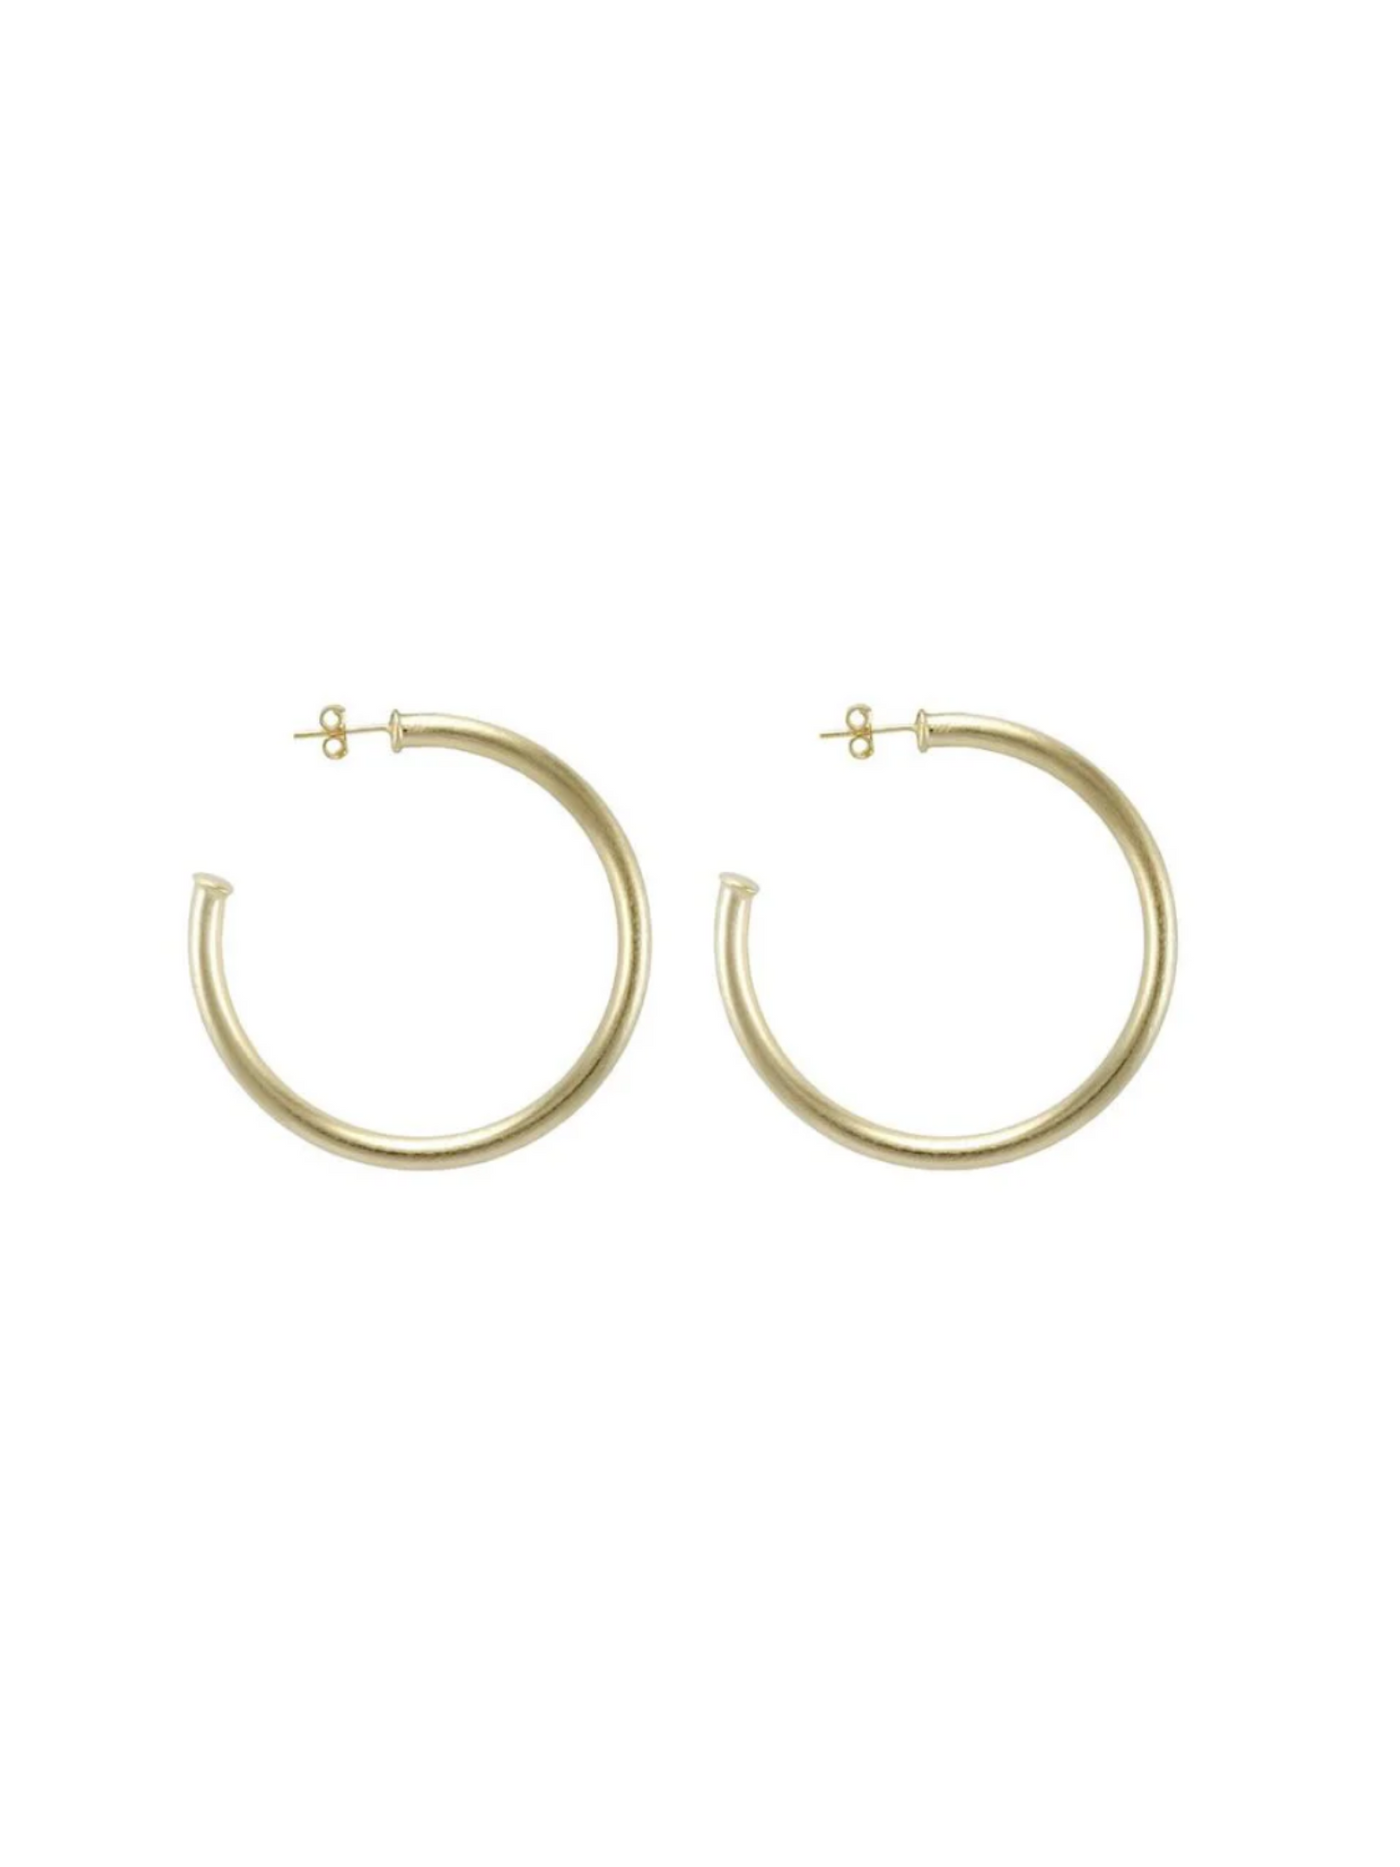 Shelia Fajl Petite Everybody's Favorite Hoops in brushed gold on white background.